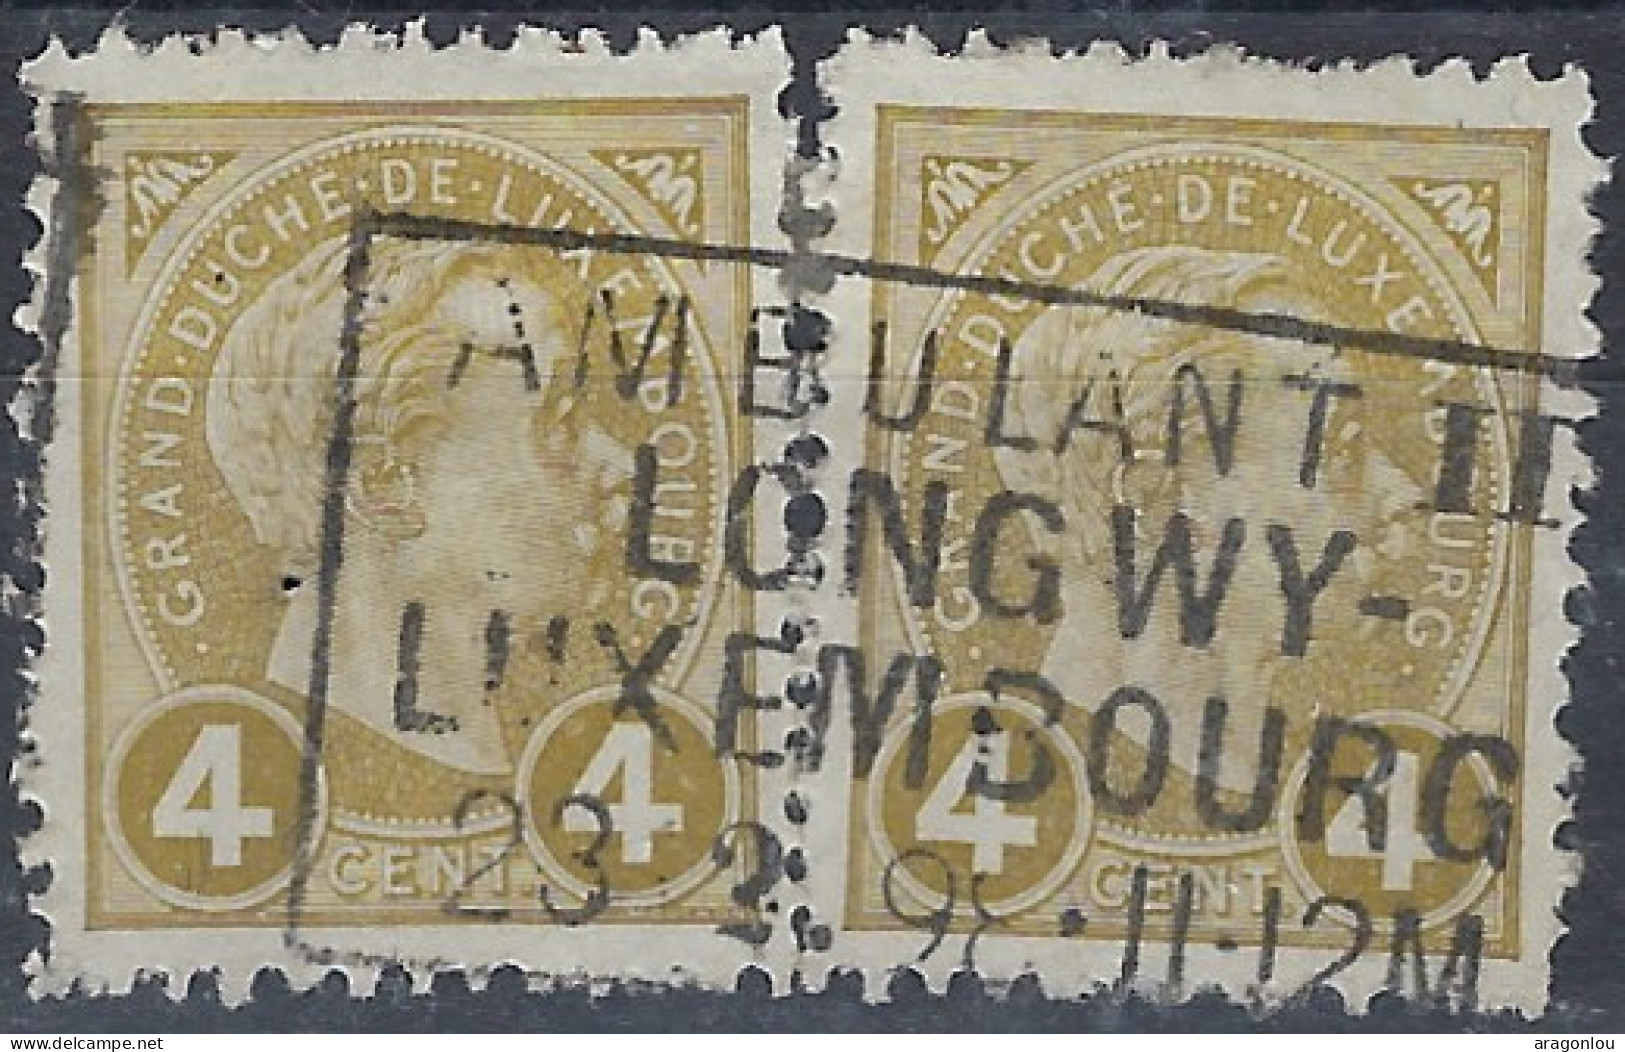 Luxembourg - Luxemburg - Timbres - Adolphe  -  Cachet  Ambulant  -  Longwy - Luxembourg   Paire   ° - 1895 Adolphe Right-hand Side